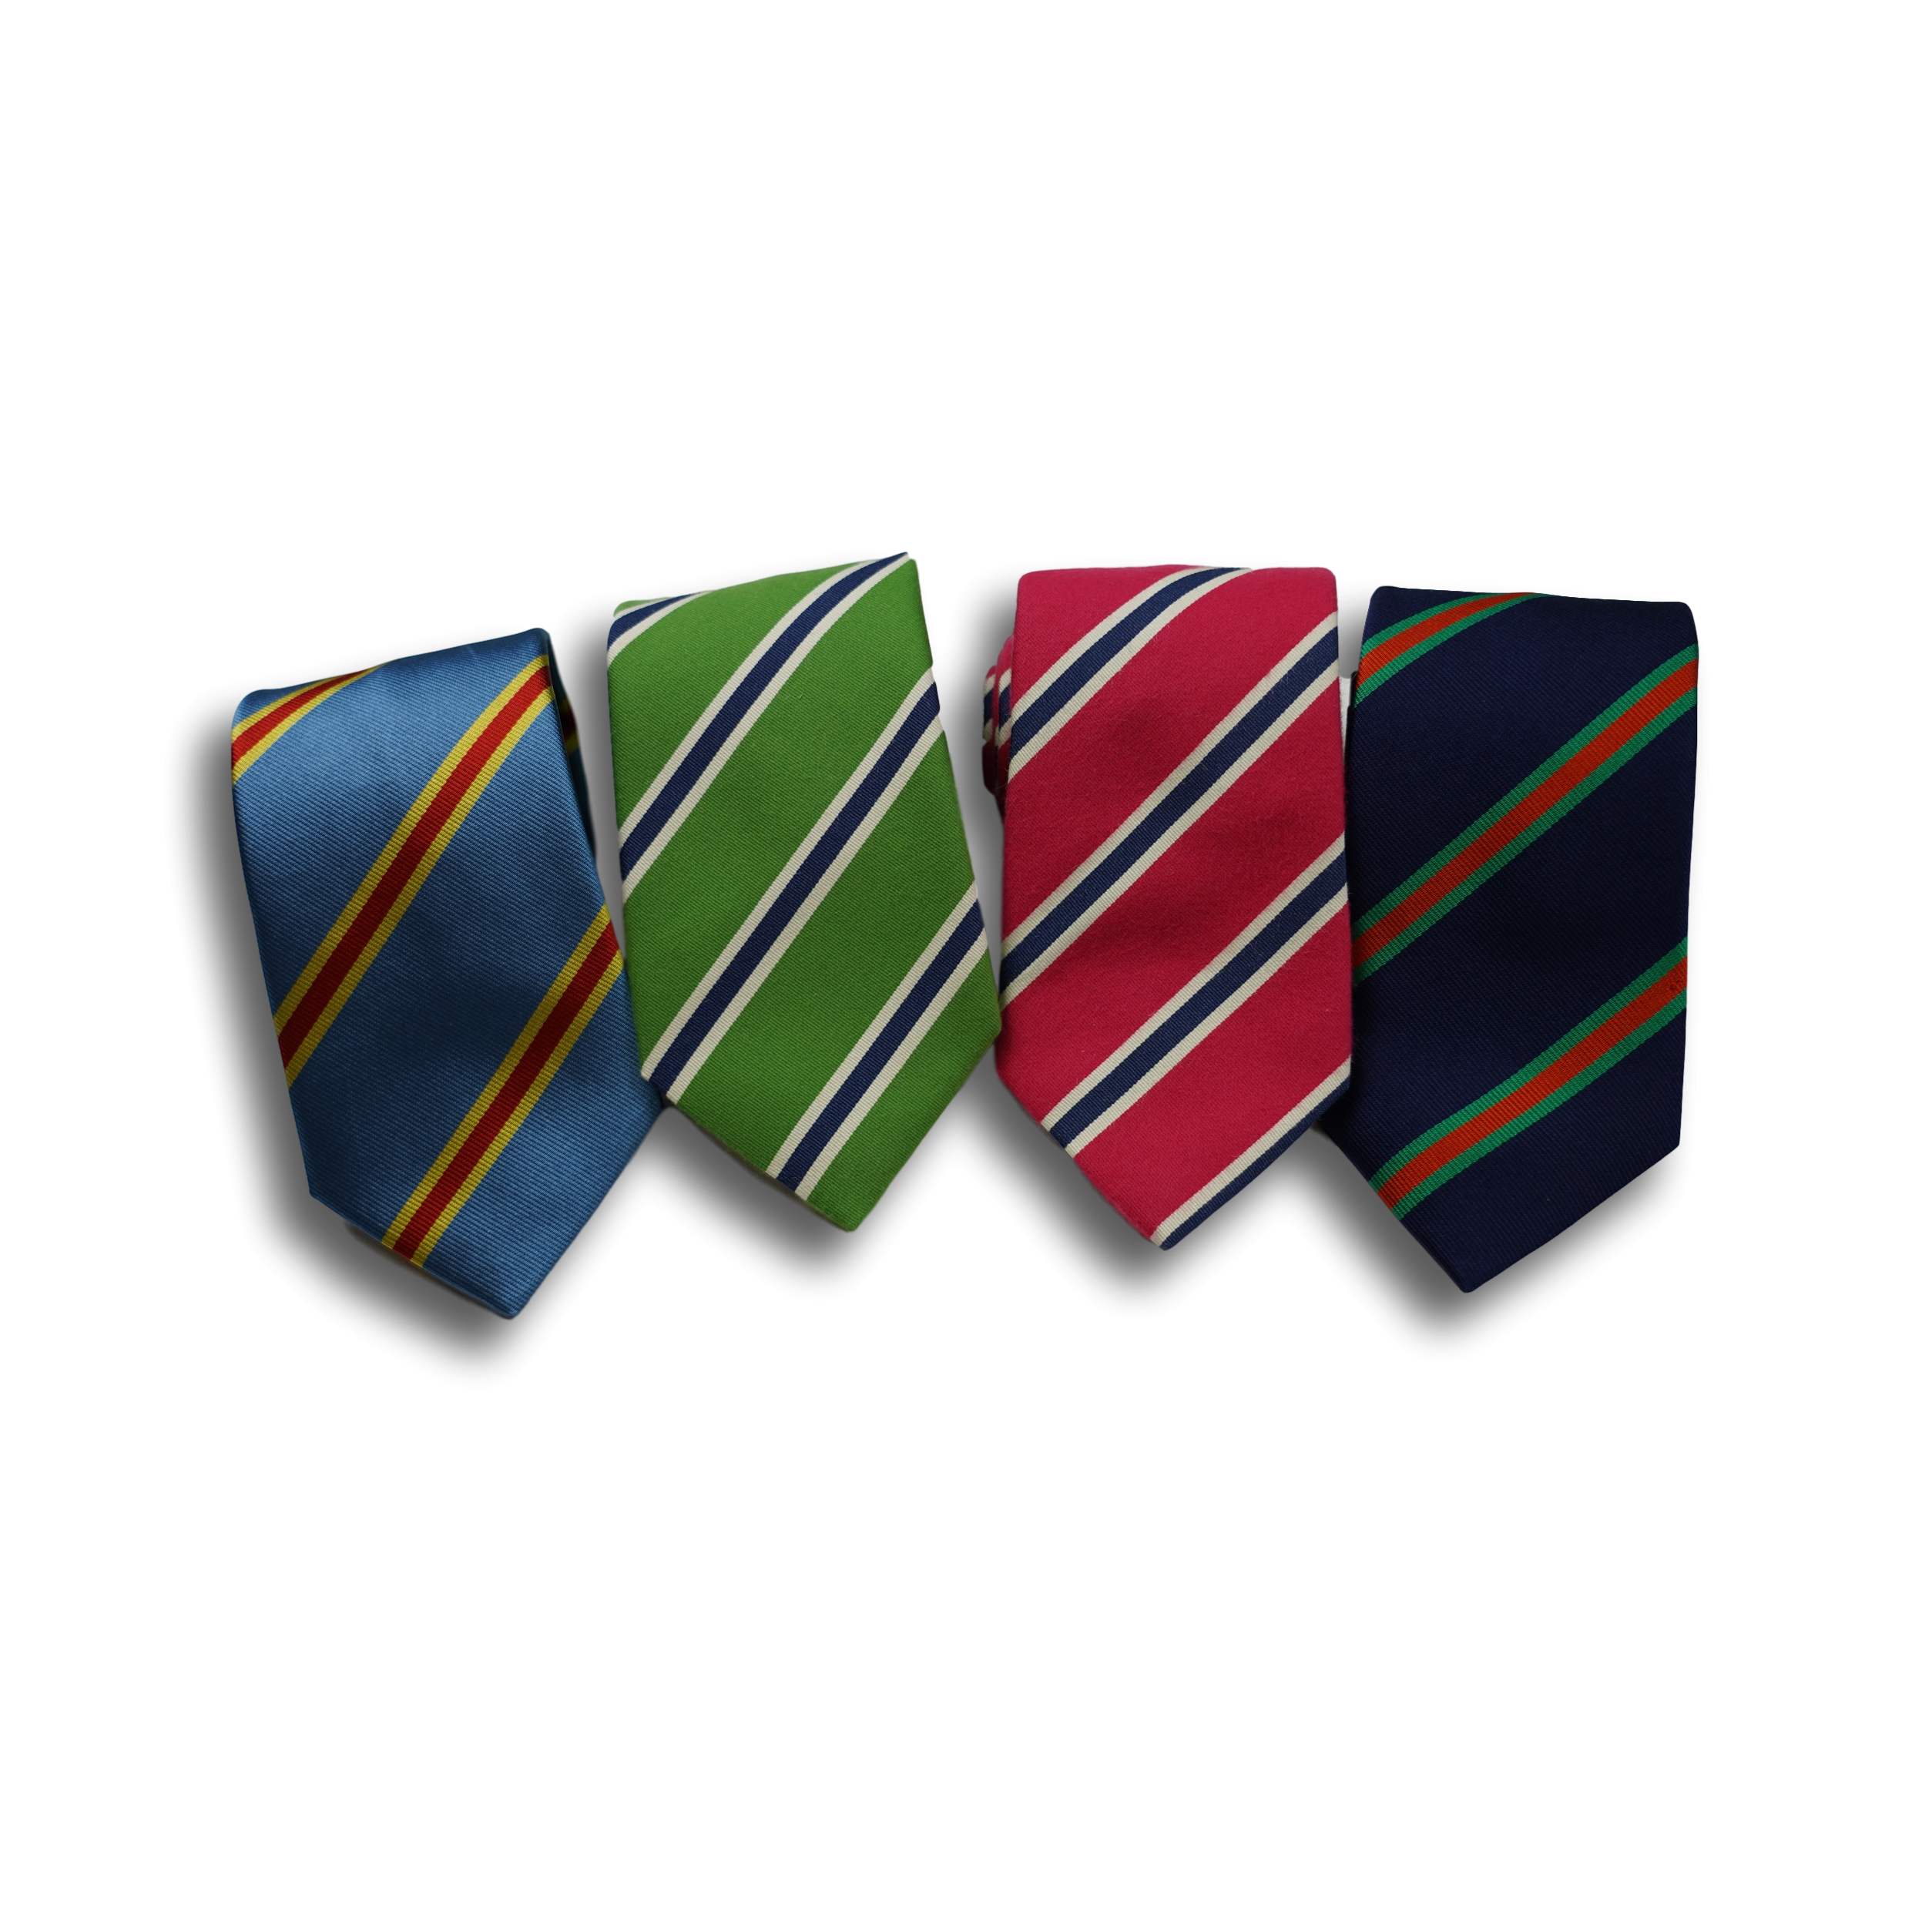 Navy and Kelly Green/Orange Reppe Stripe Tie